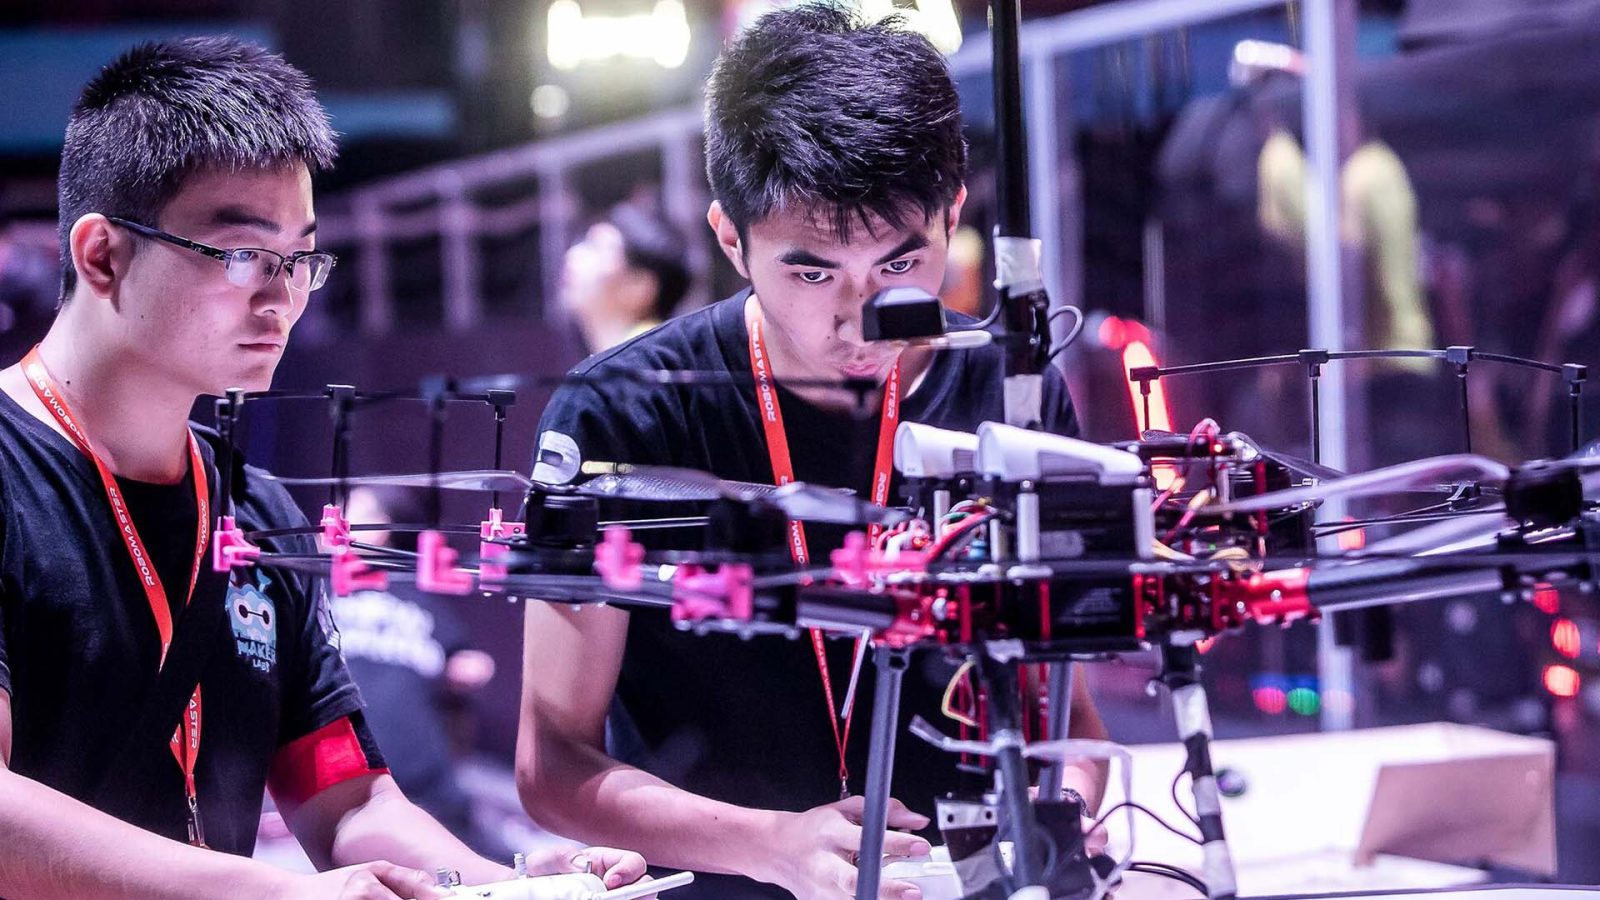 South China University of Technology takes home the gold trophy in the 2018 RoboMaster Competition